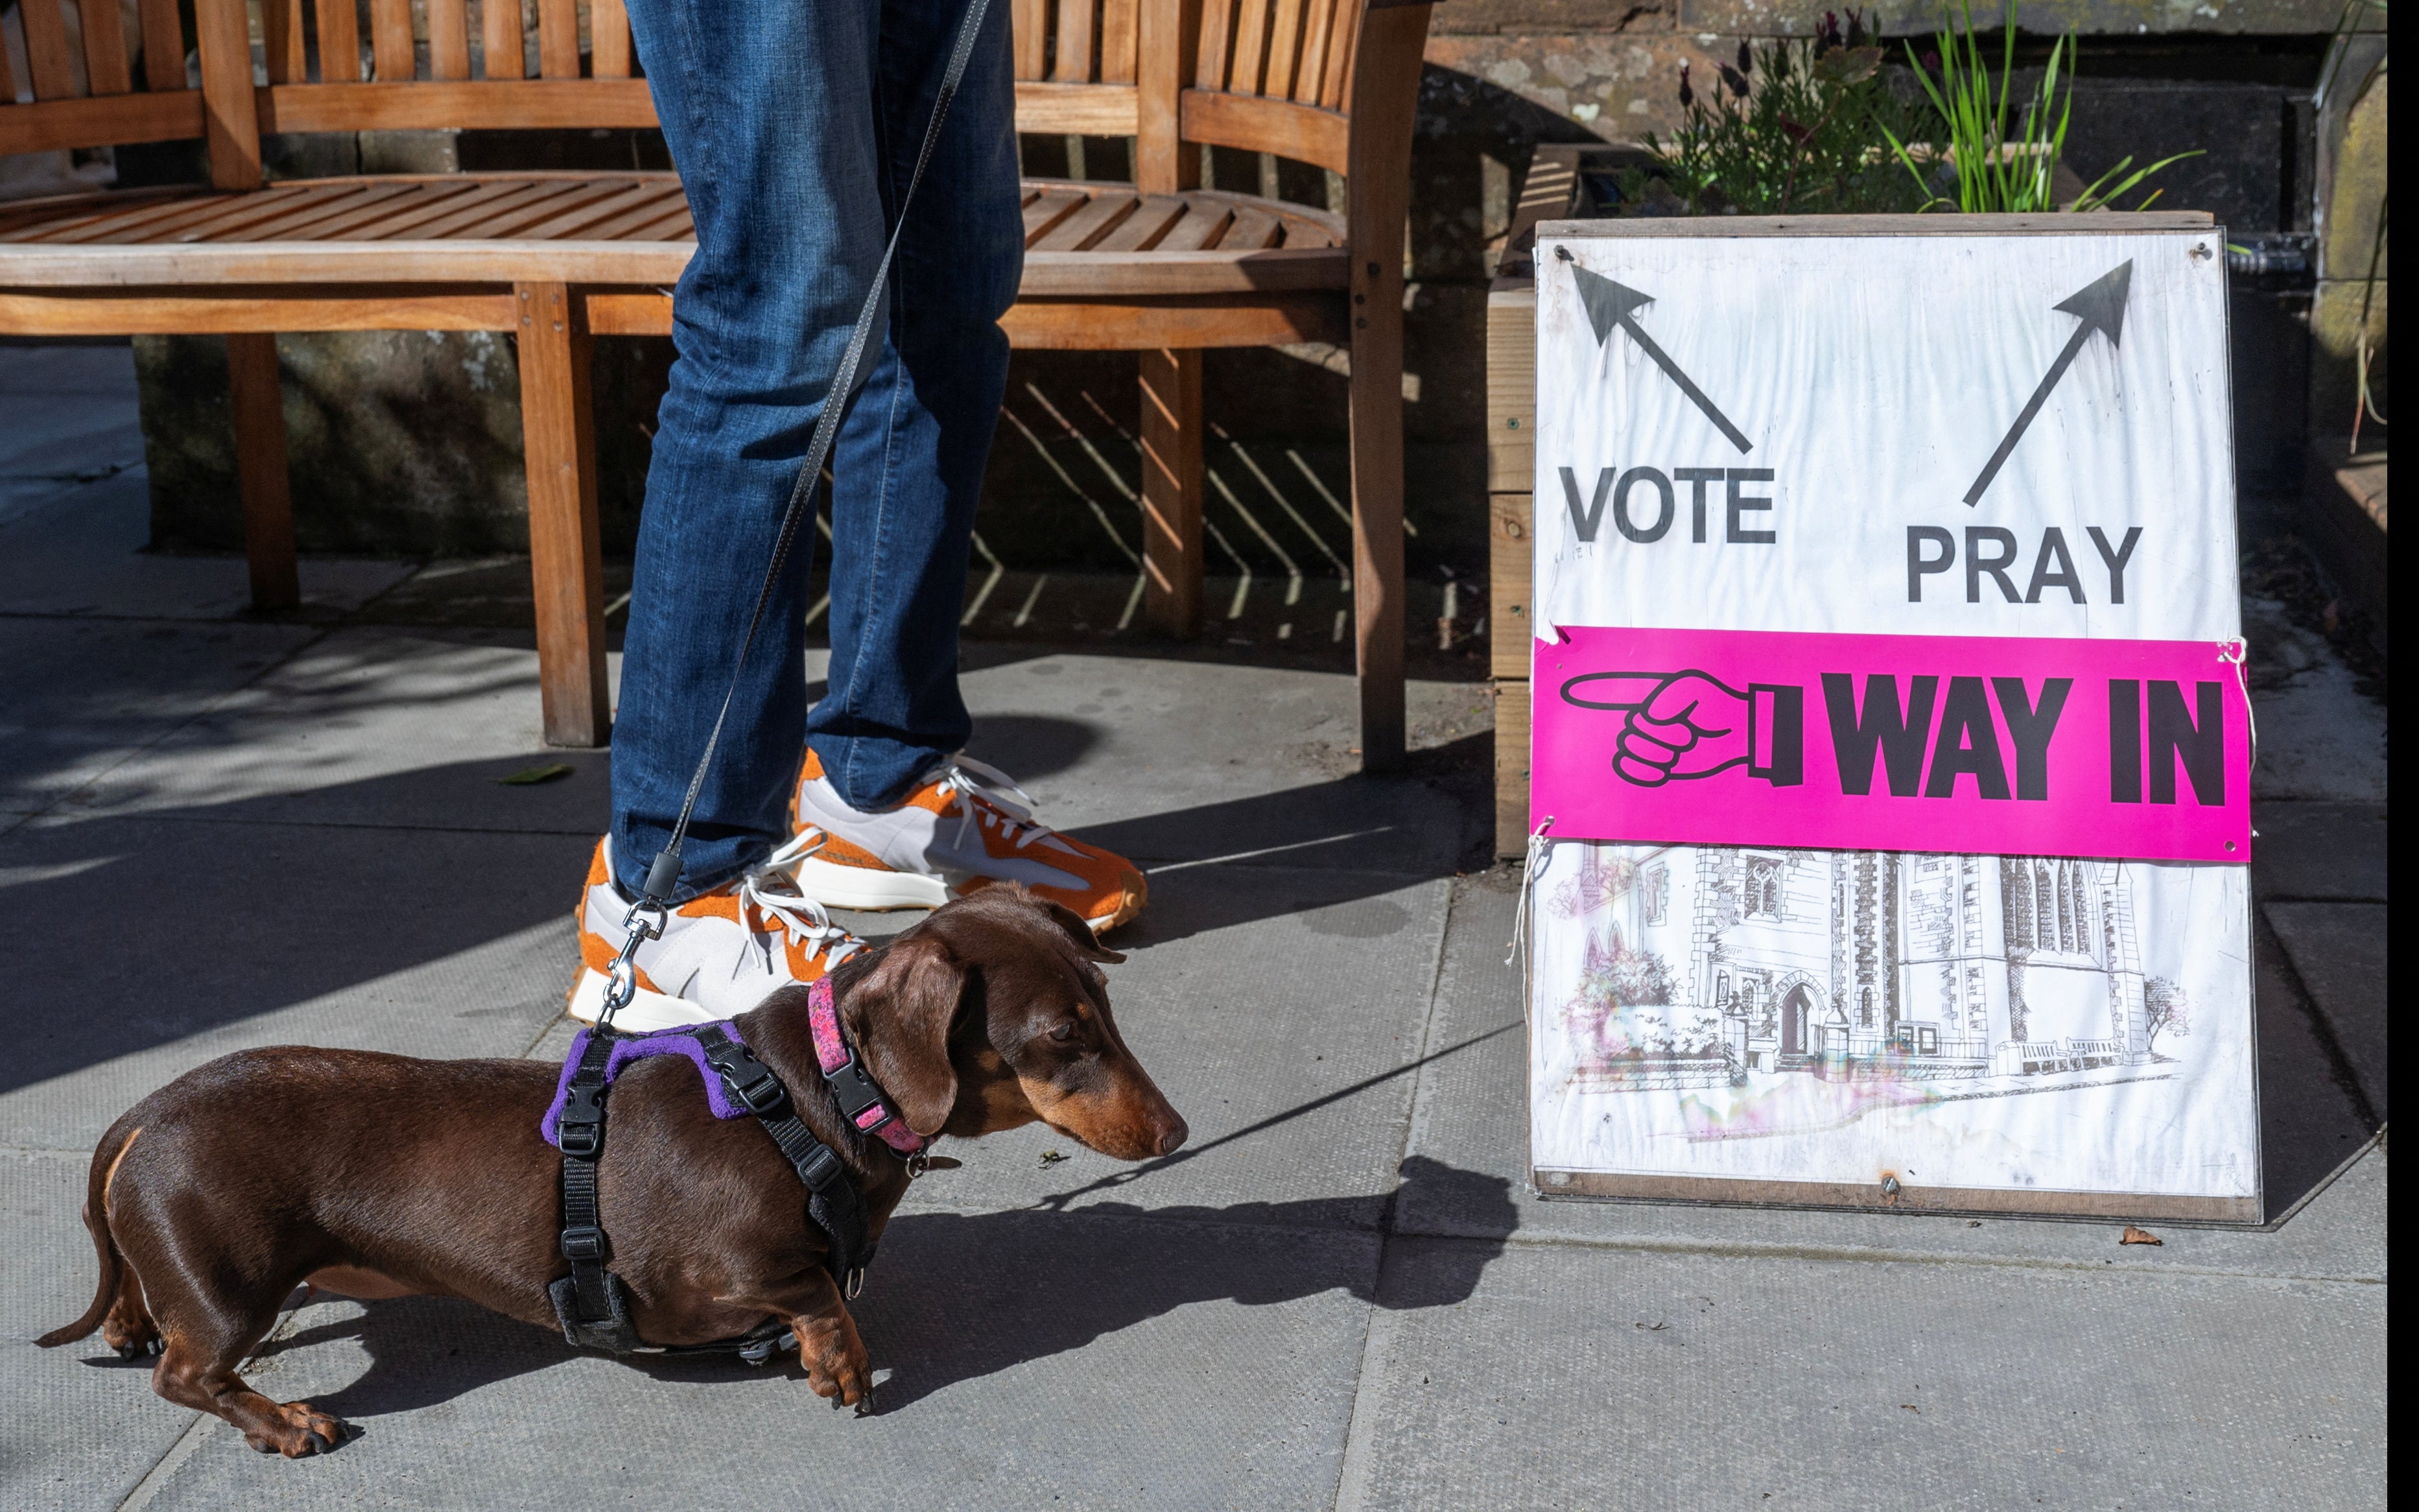 A person and a dog wait outside St James’ Church polling station during the general election in Edinburgh, Scotland